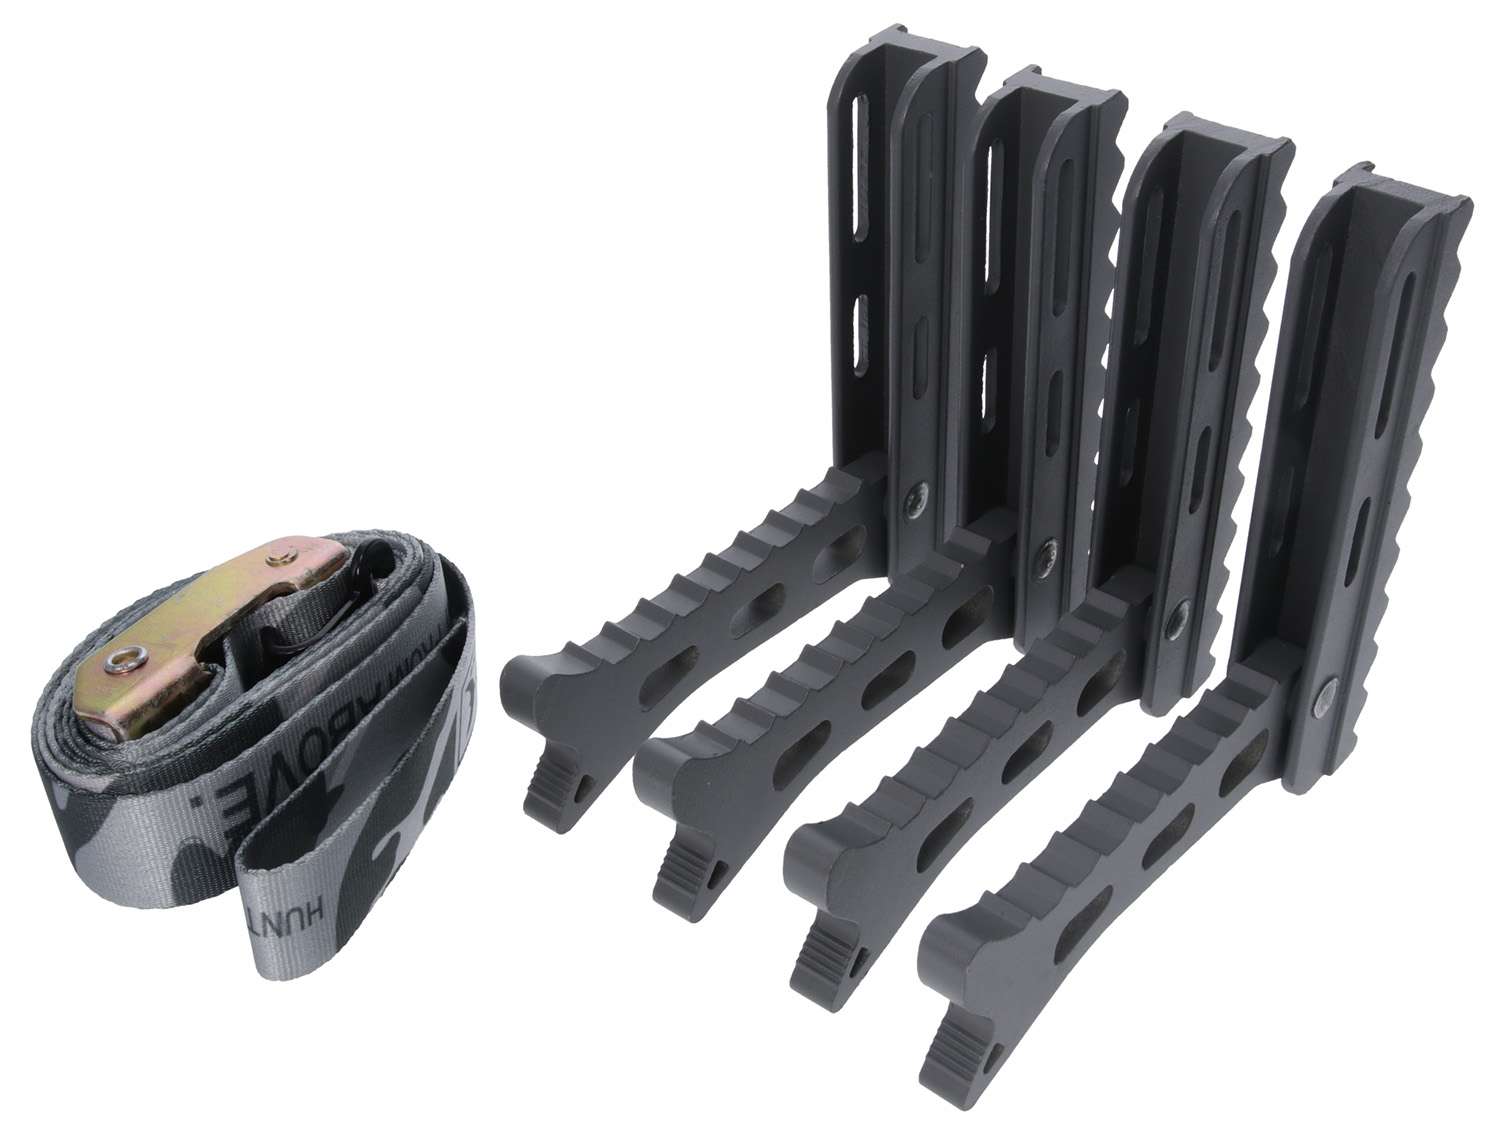 HAWK HWK-HHSTP-4PK HELIUM STEPS WITH STRAPS 4 PACK